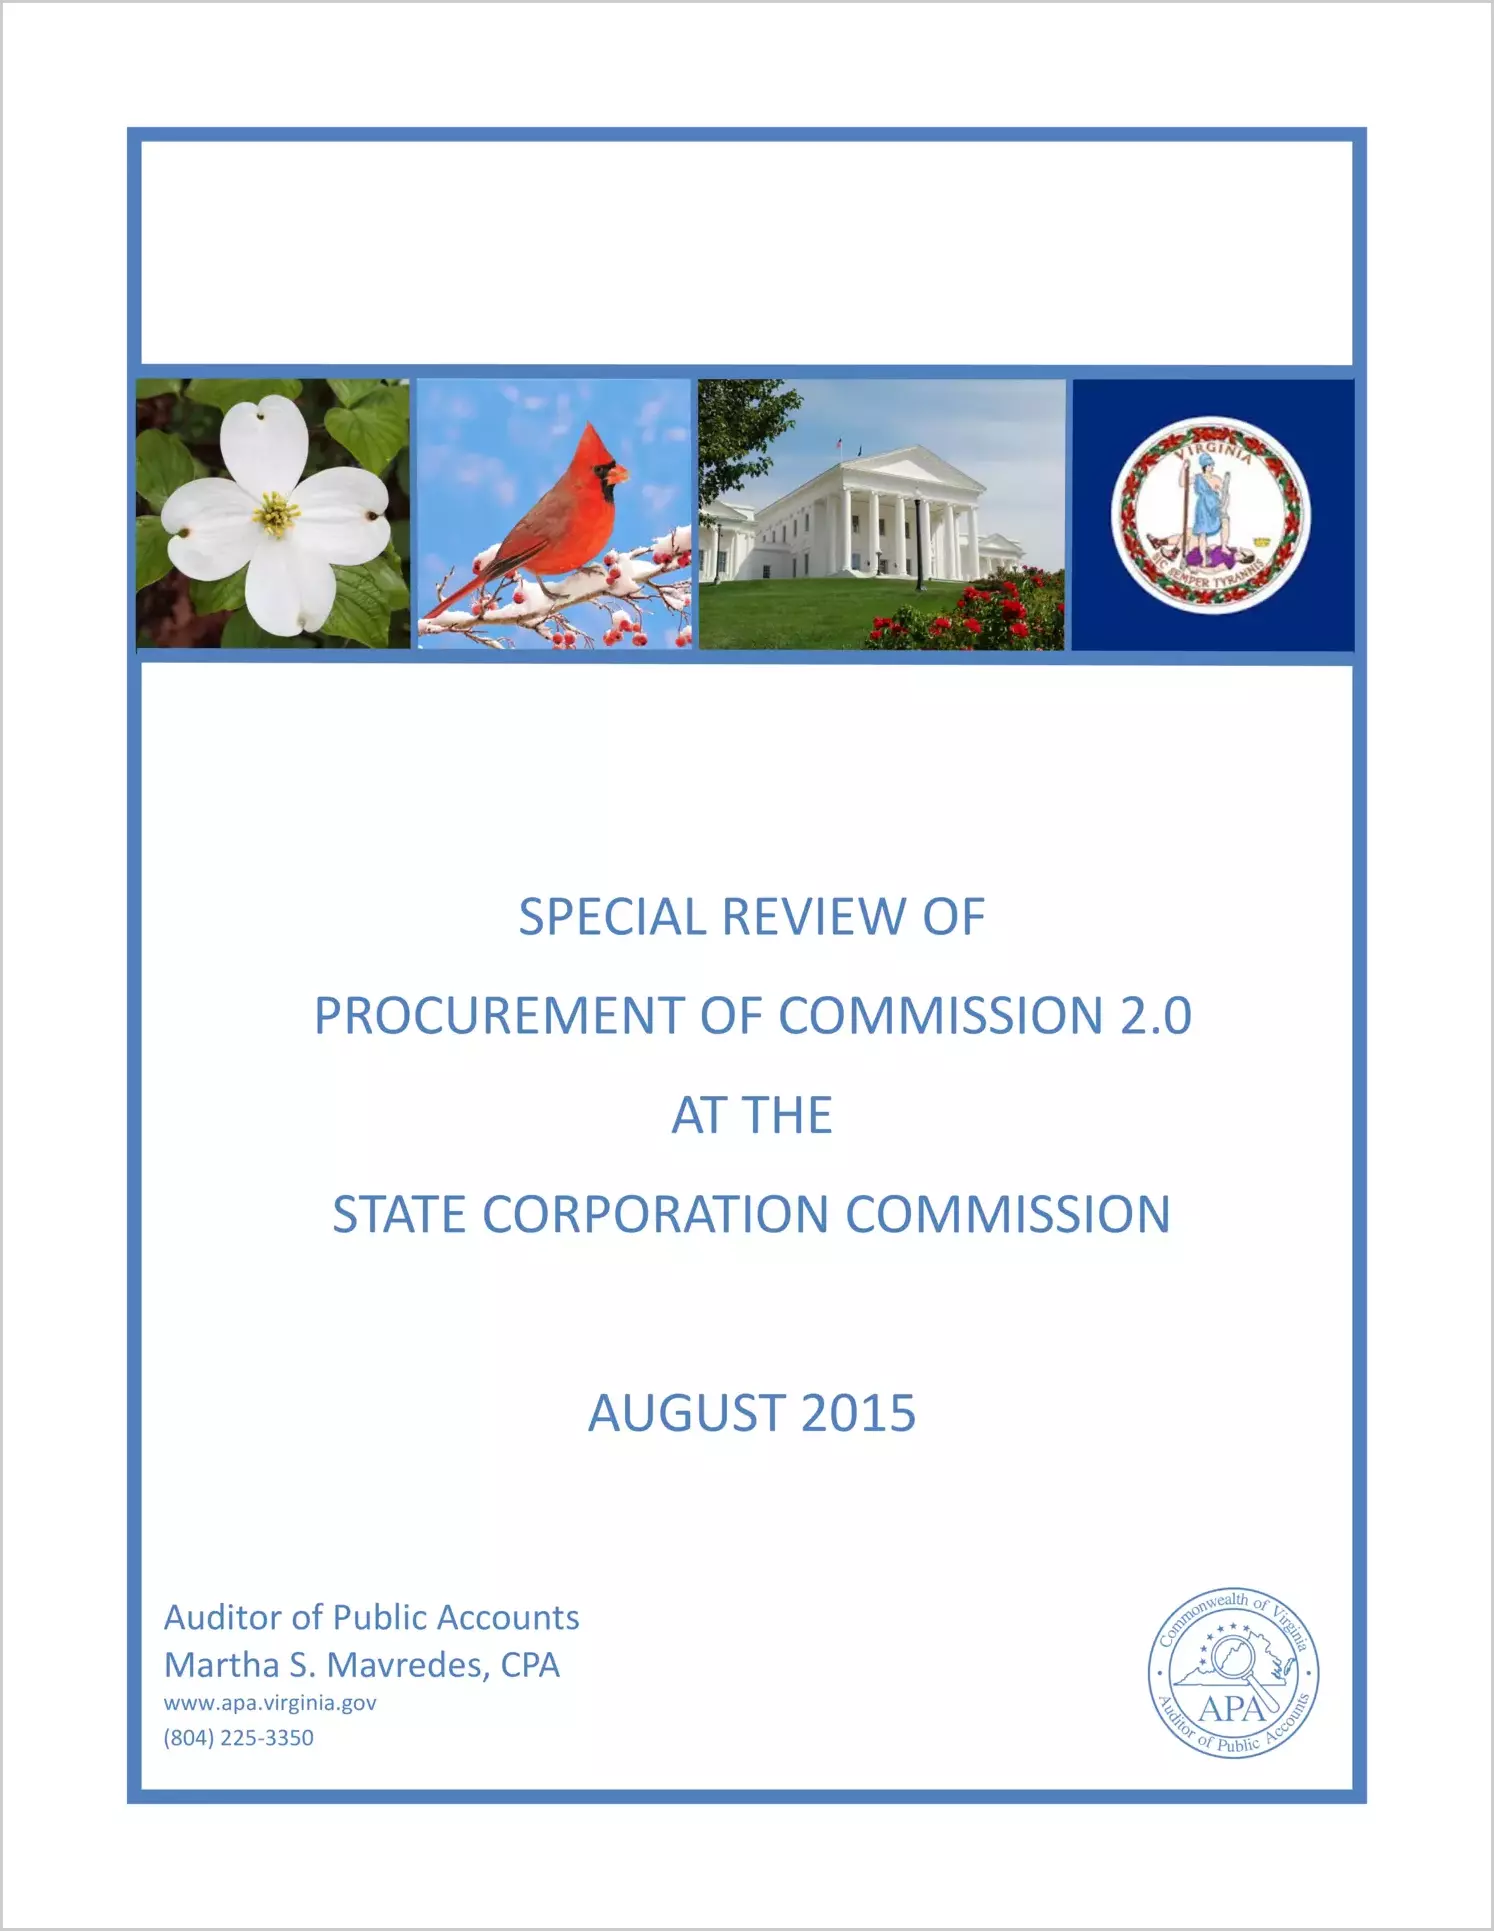 Special Review of Procurement of Commission 2.0 at the State Corporation Commission - August 2015